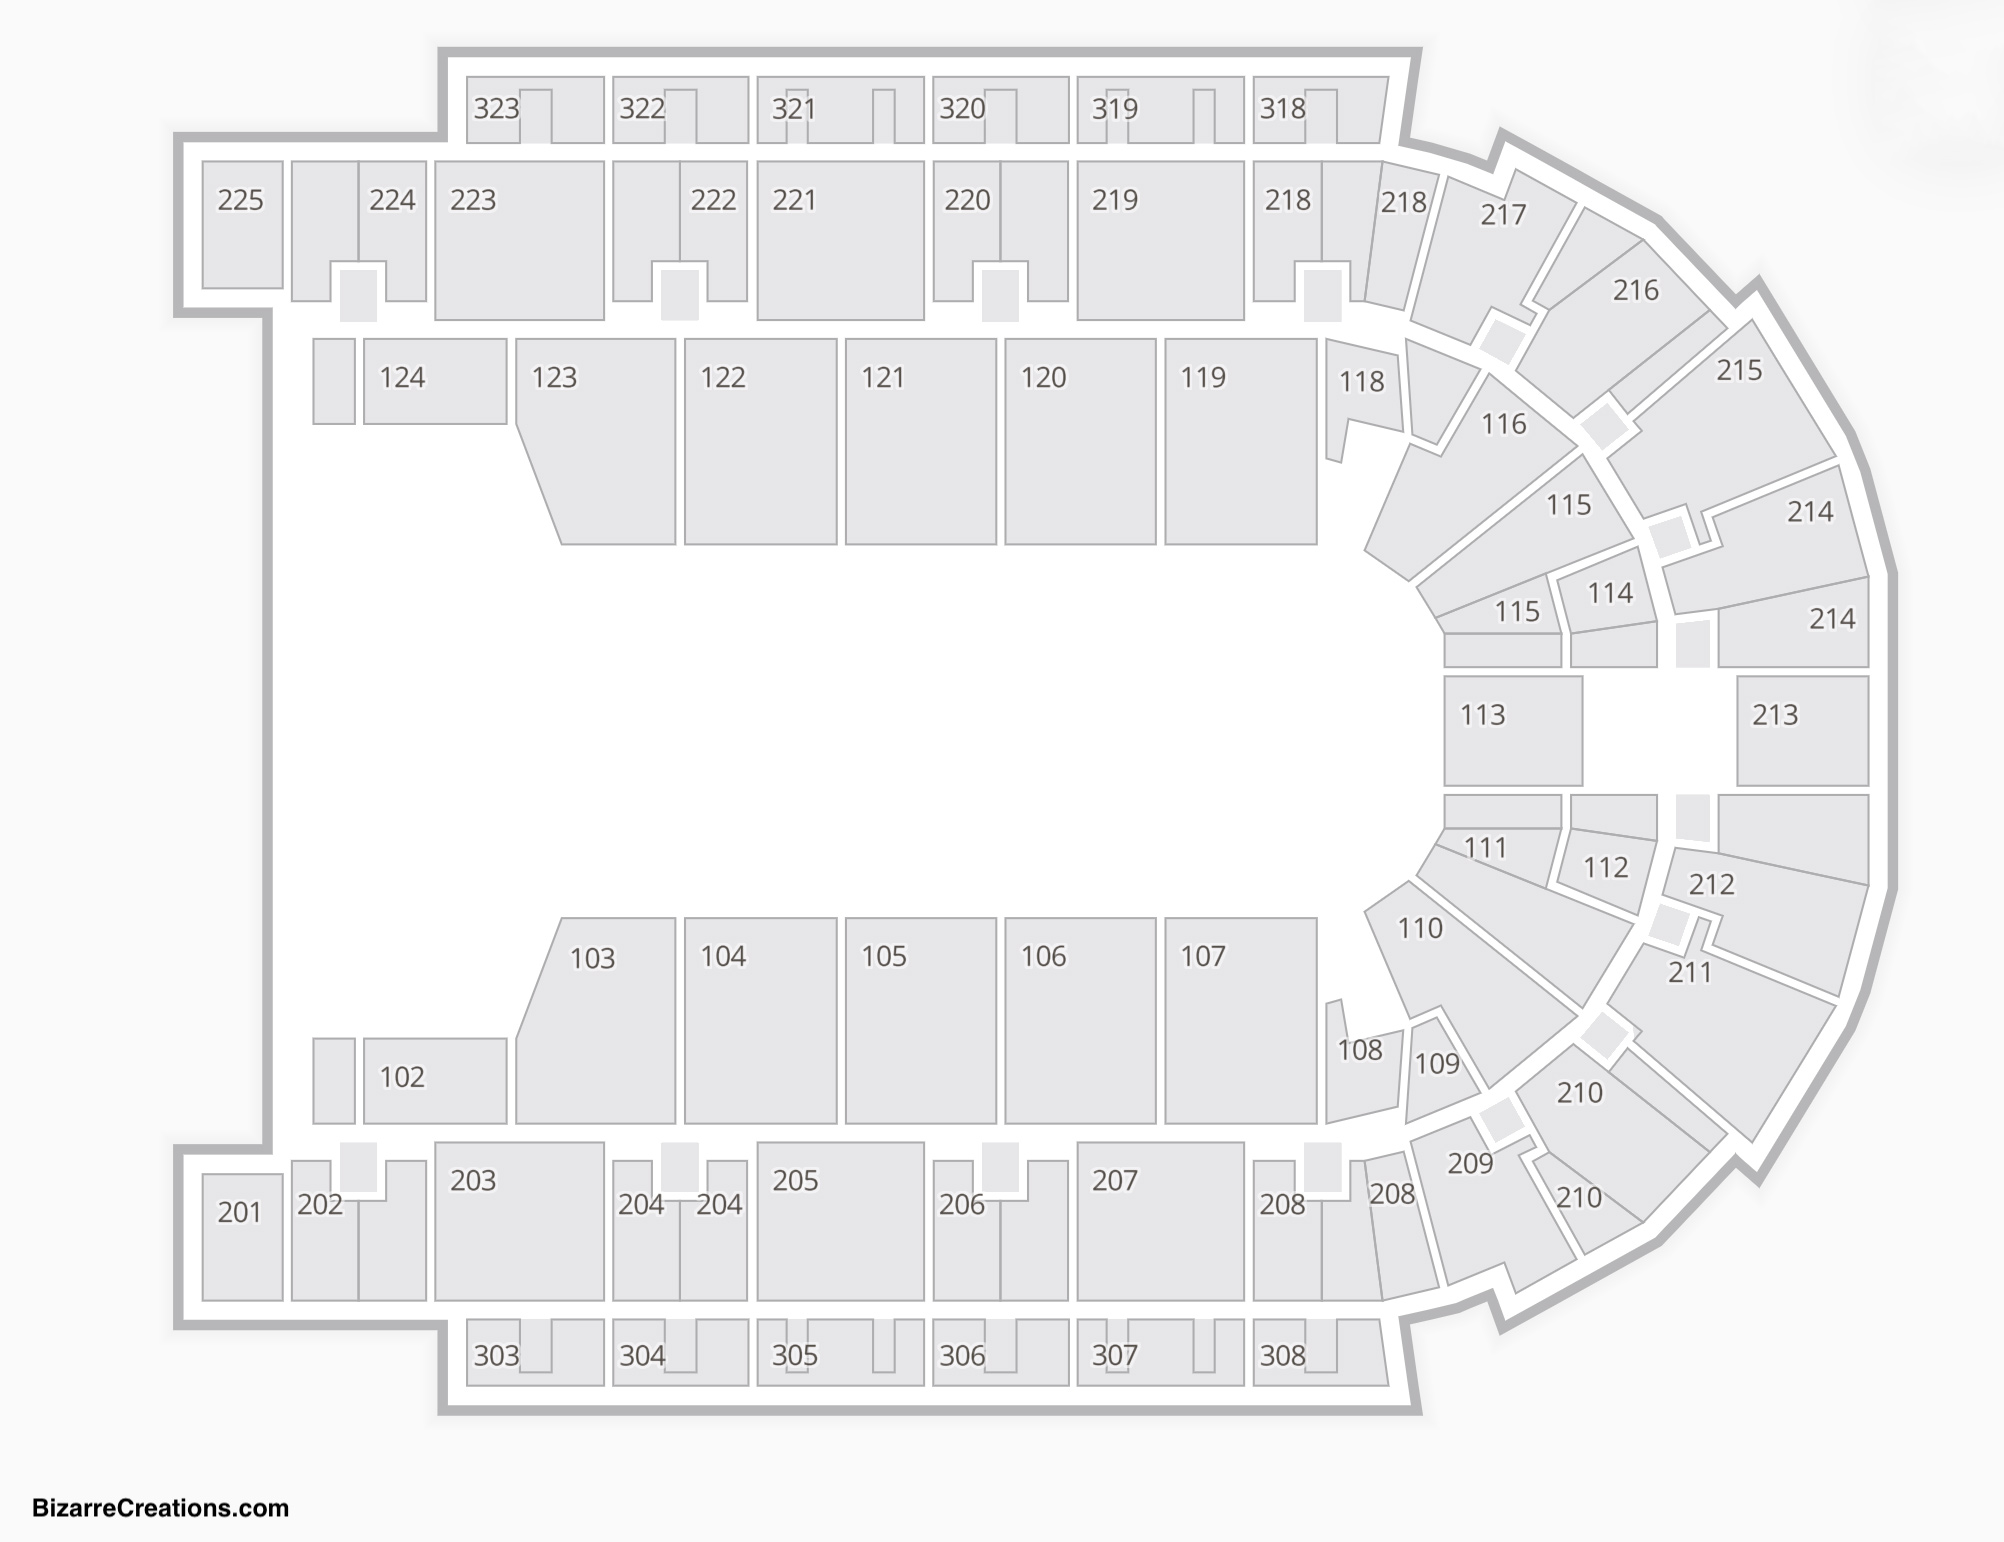 Boardwalk Hall Seating Chart Seating Charts & Tickets